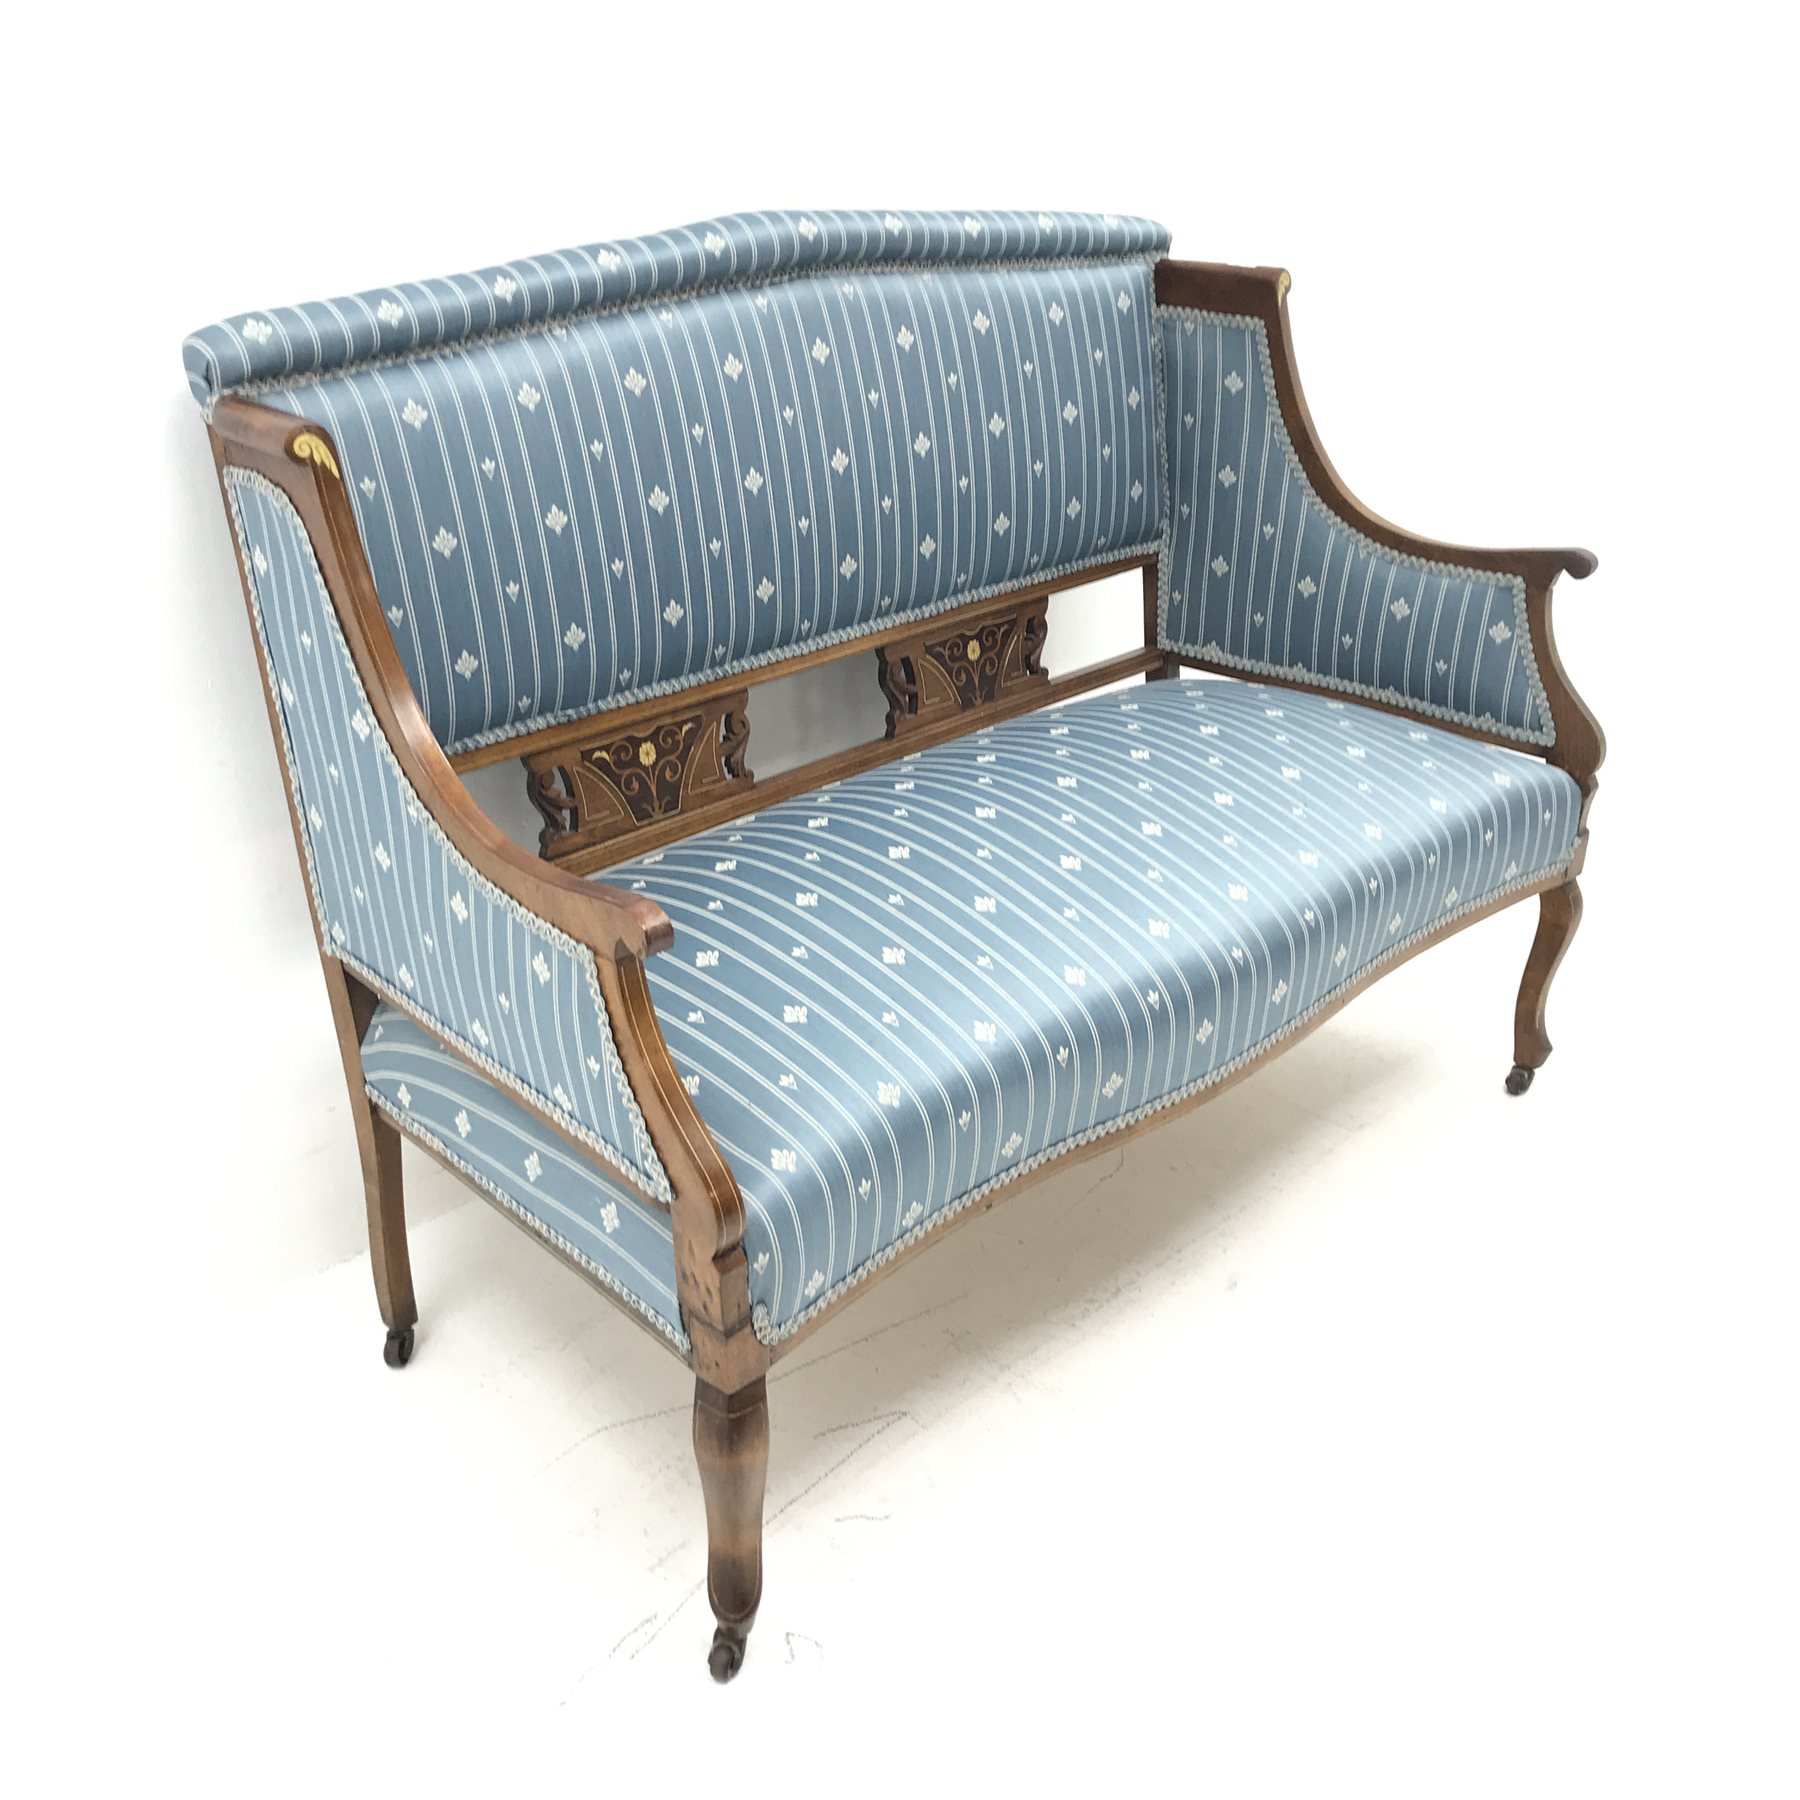 Edwardian inlaid mahogany framed two seat sofa, upholstered in a blue striped fabric, scrolled arms,